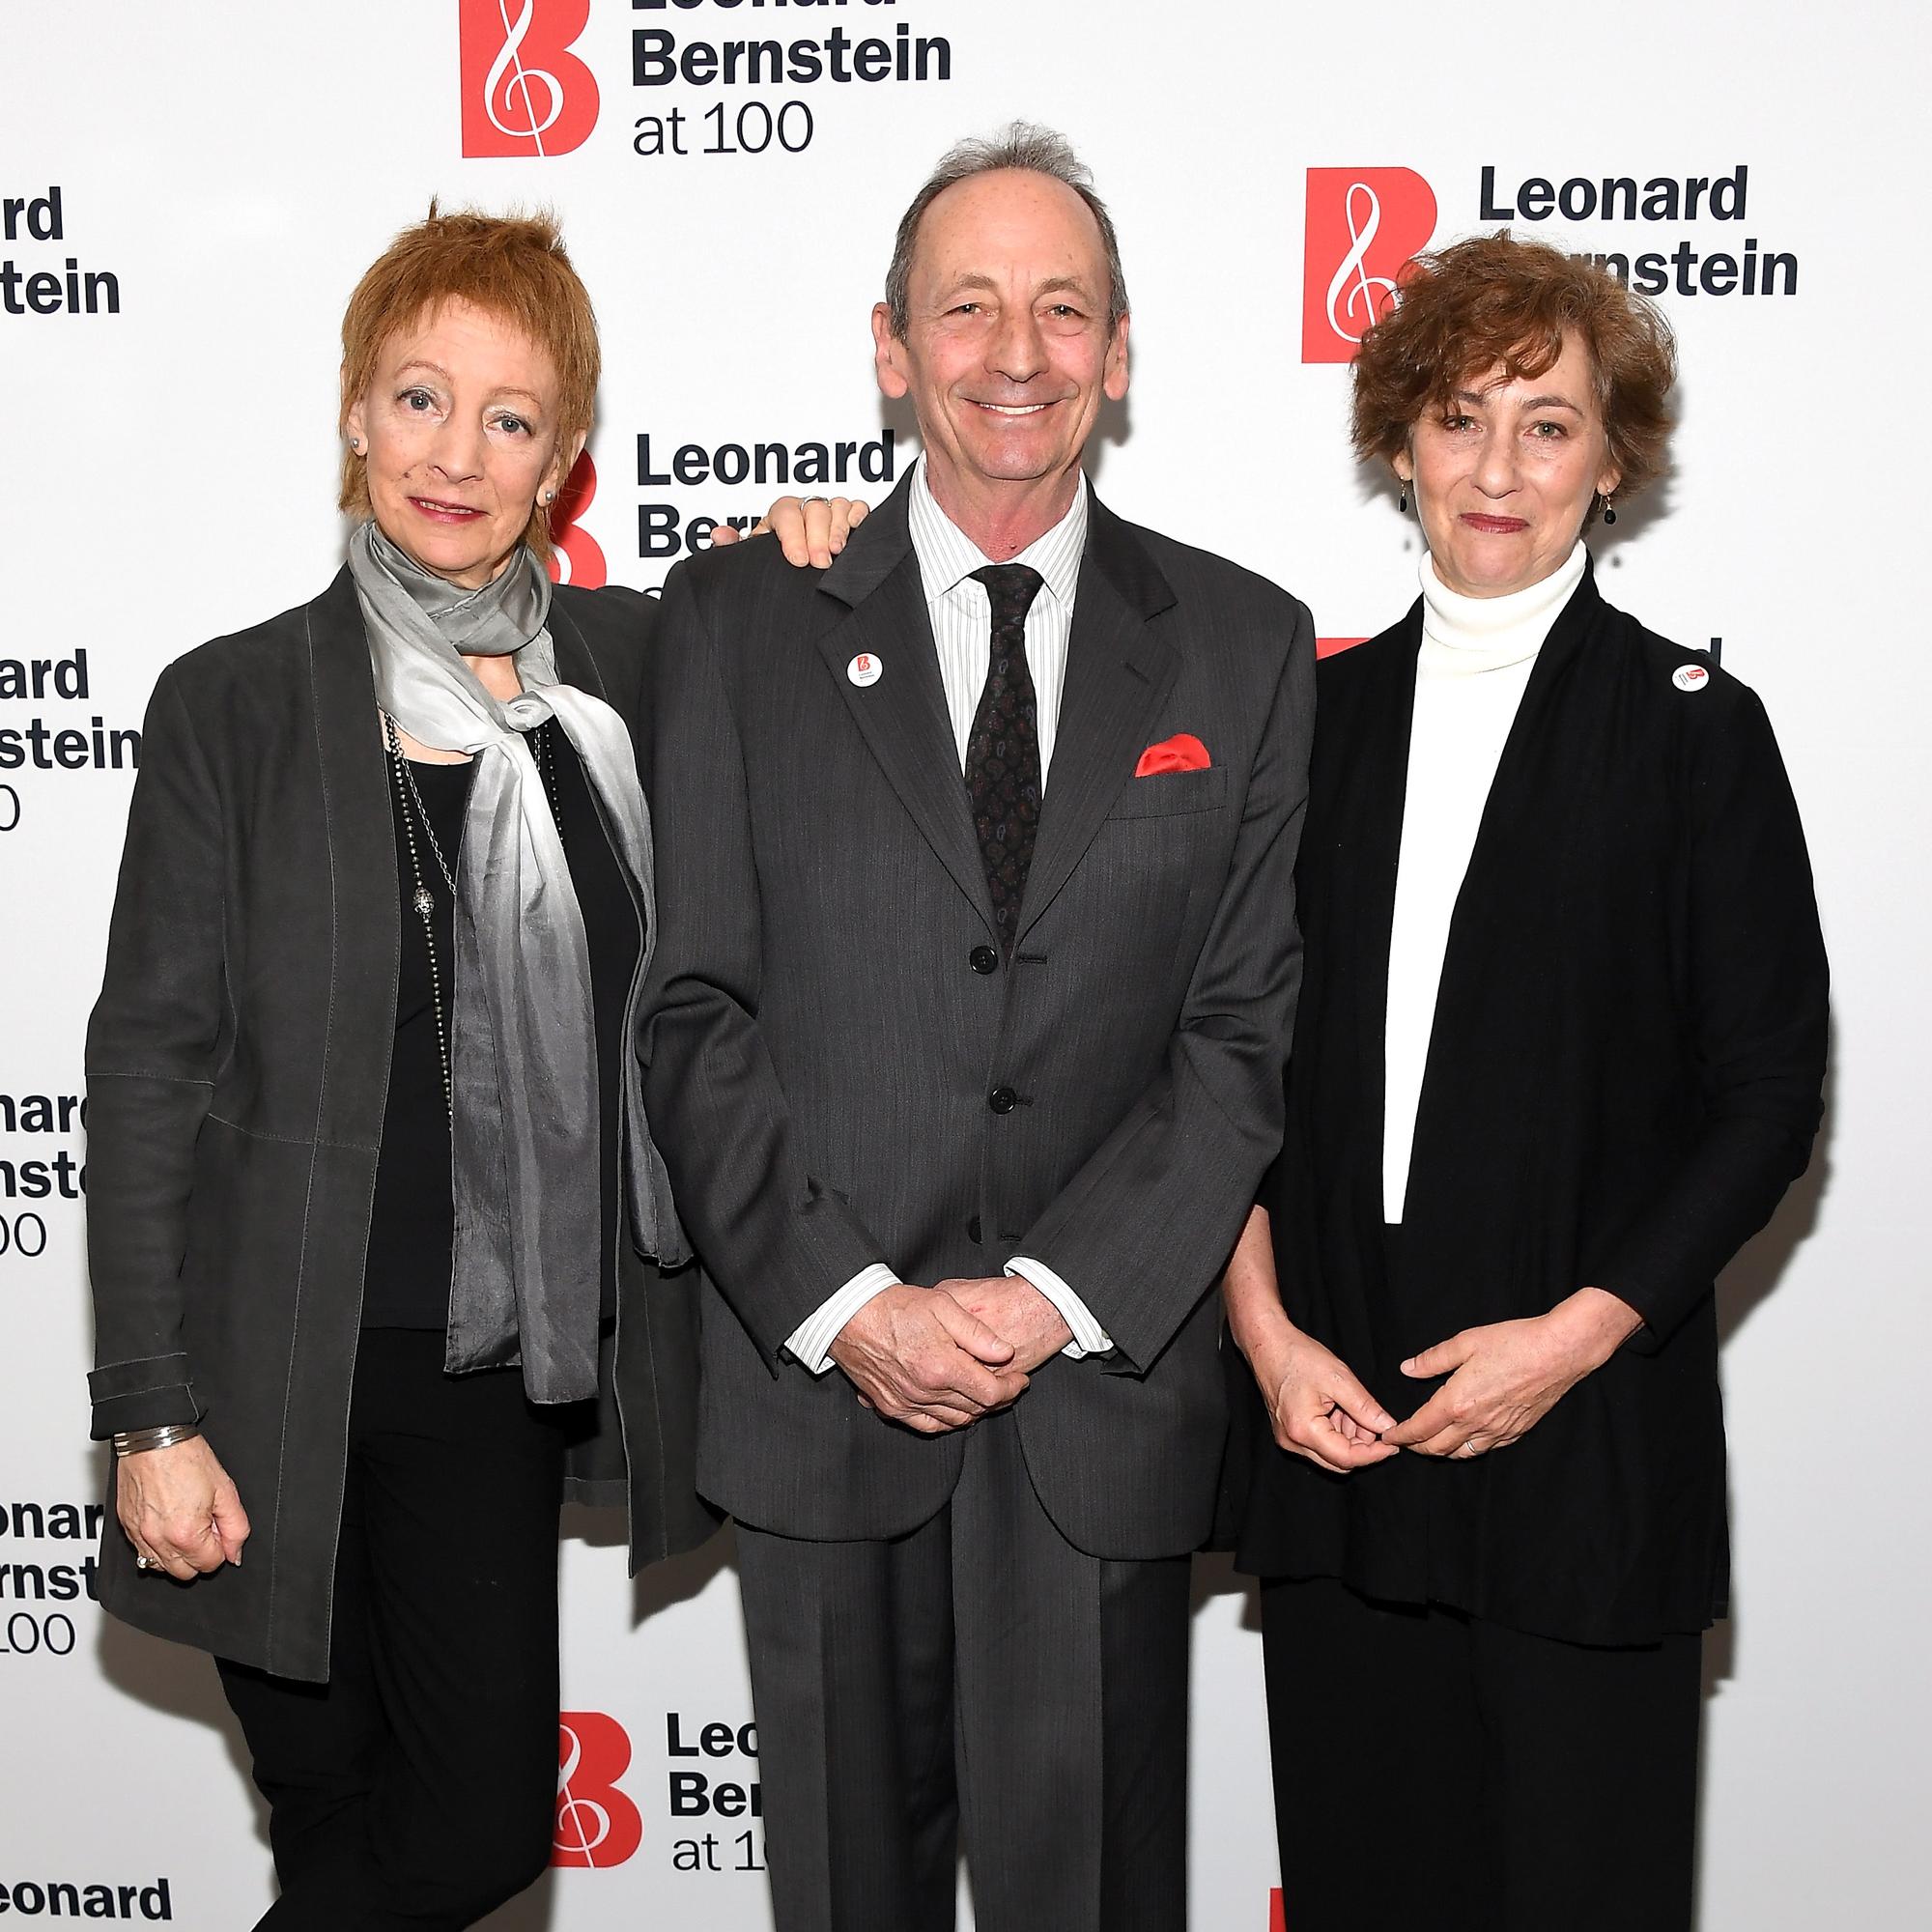 NEW YORK, NY - MAY 09: (L-R) Jamie Bernstein, Alexander Bernstein, and Nina Bernstein attend the Leonard Bernstein at 100 press event at the Stanley H. Kaplan Penthouse at Lincoln Center on May 9, 2017 in New York City. [GETTY IMAGES NORTH AMERICA / AFP - Dia Dipasupil]